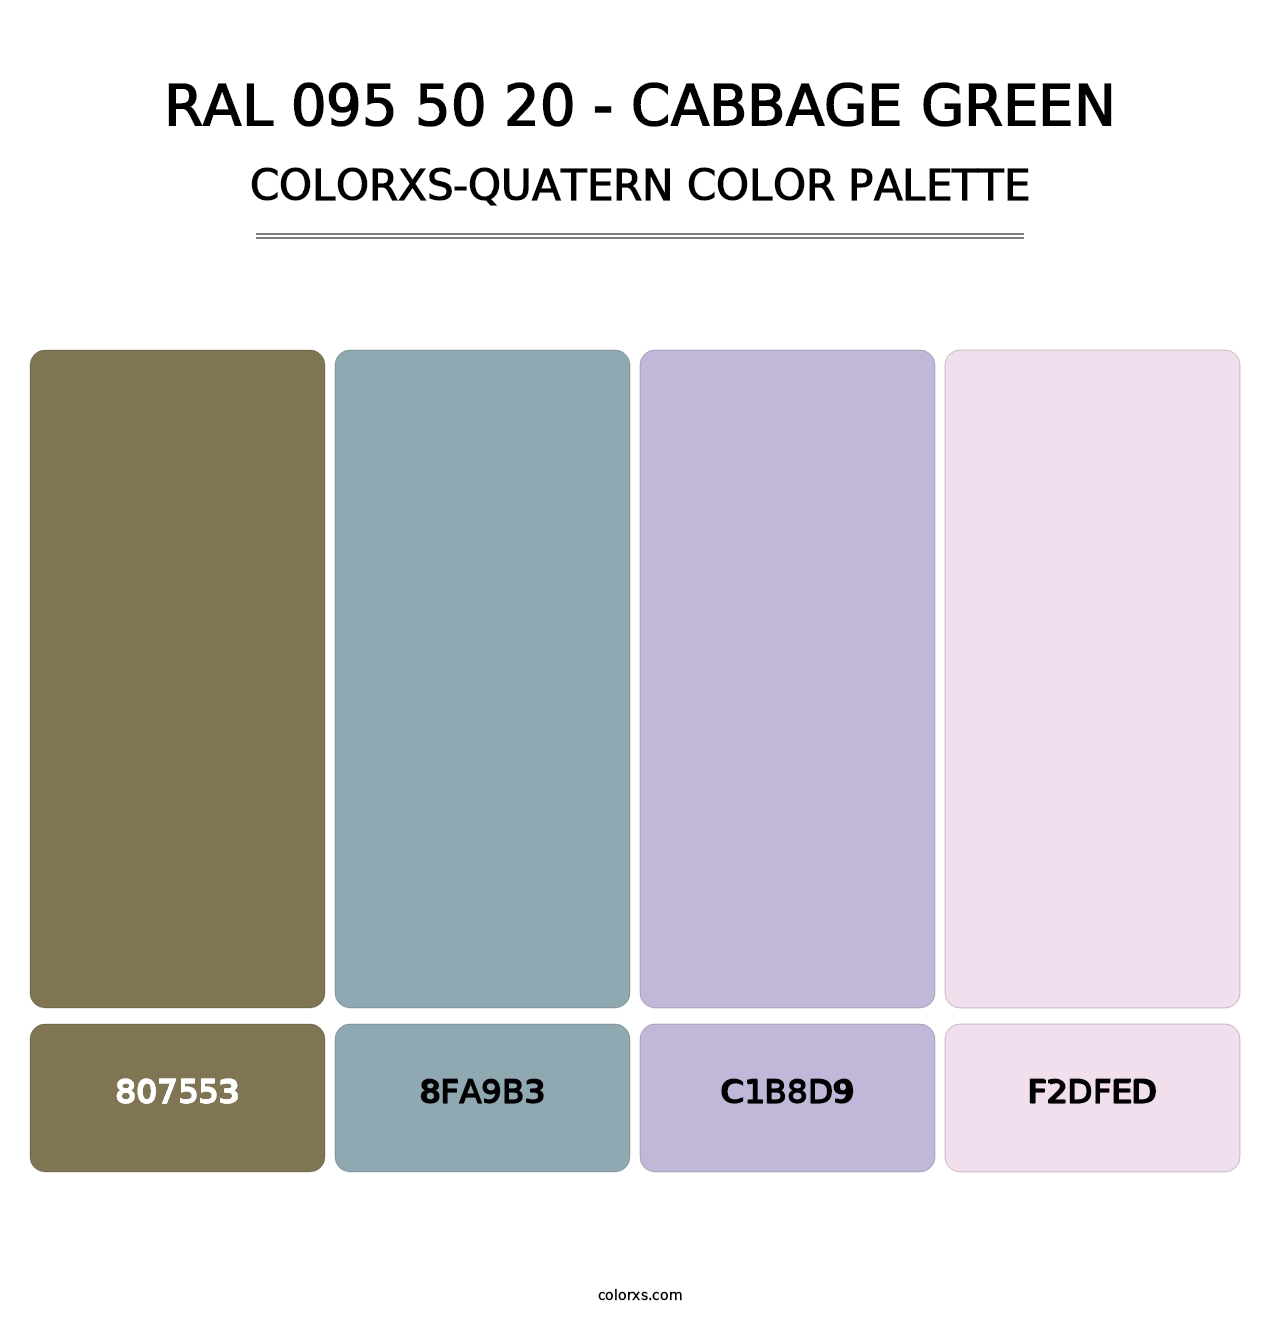 RAL 095 50 20 - Cabbage Green - Colorxs Quatern Palette